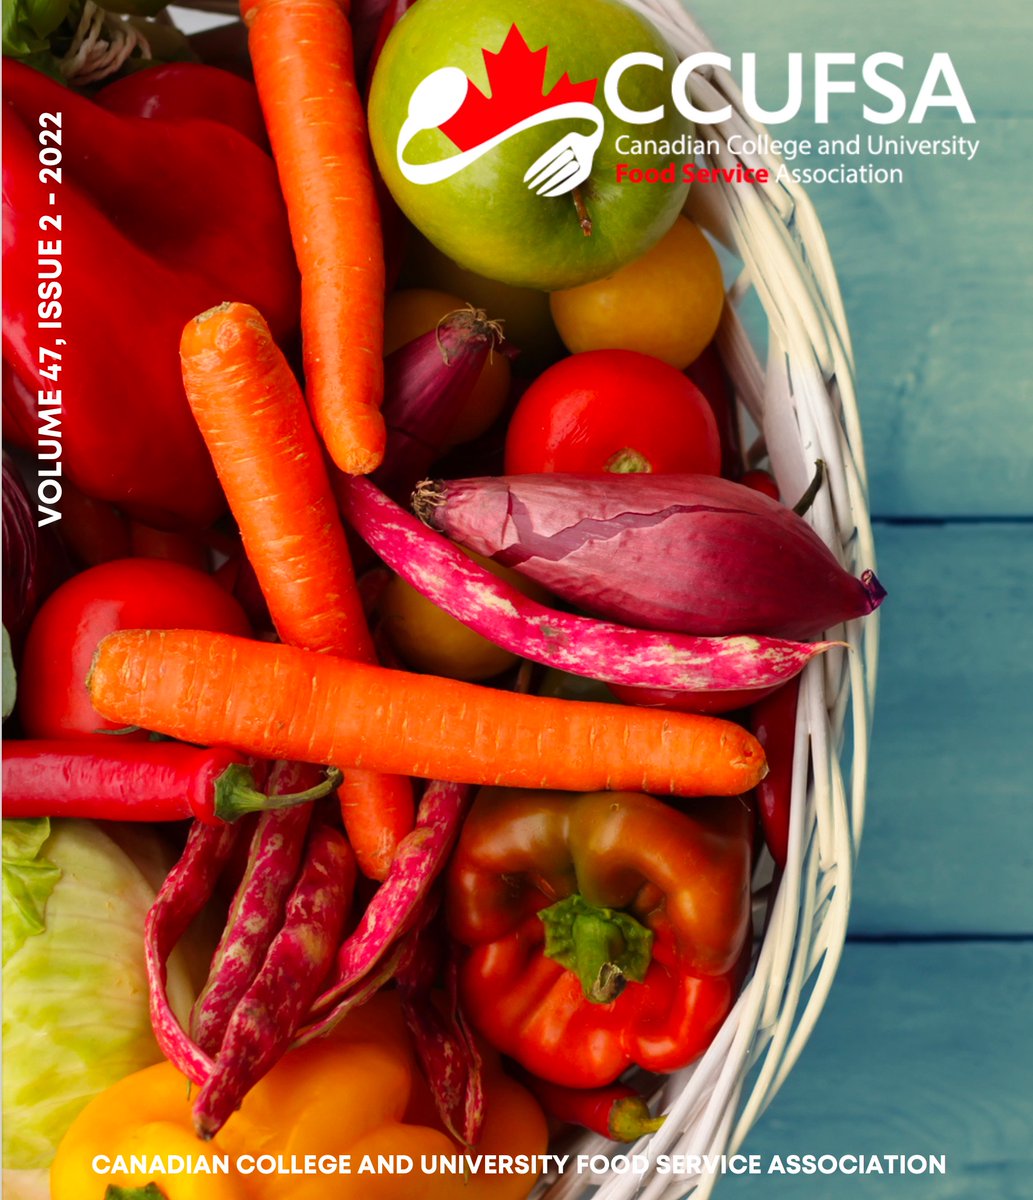 Hello, CCUFSA members!

The next issue of the CCUFSA MAGAZINE is now available to read online here: ccufsa.com/magazine/ 

Feel free to share the link with your team members and colleagues!

#CCUFSA #CCUFSA2023